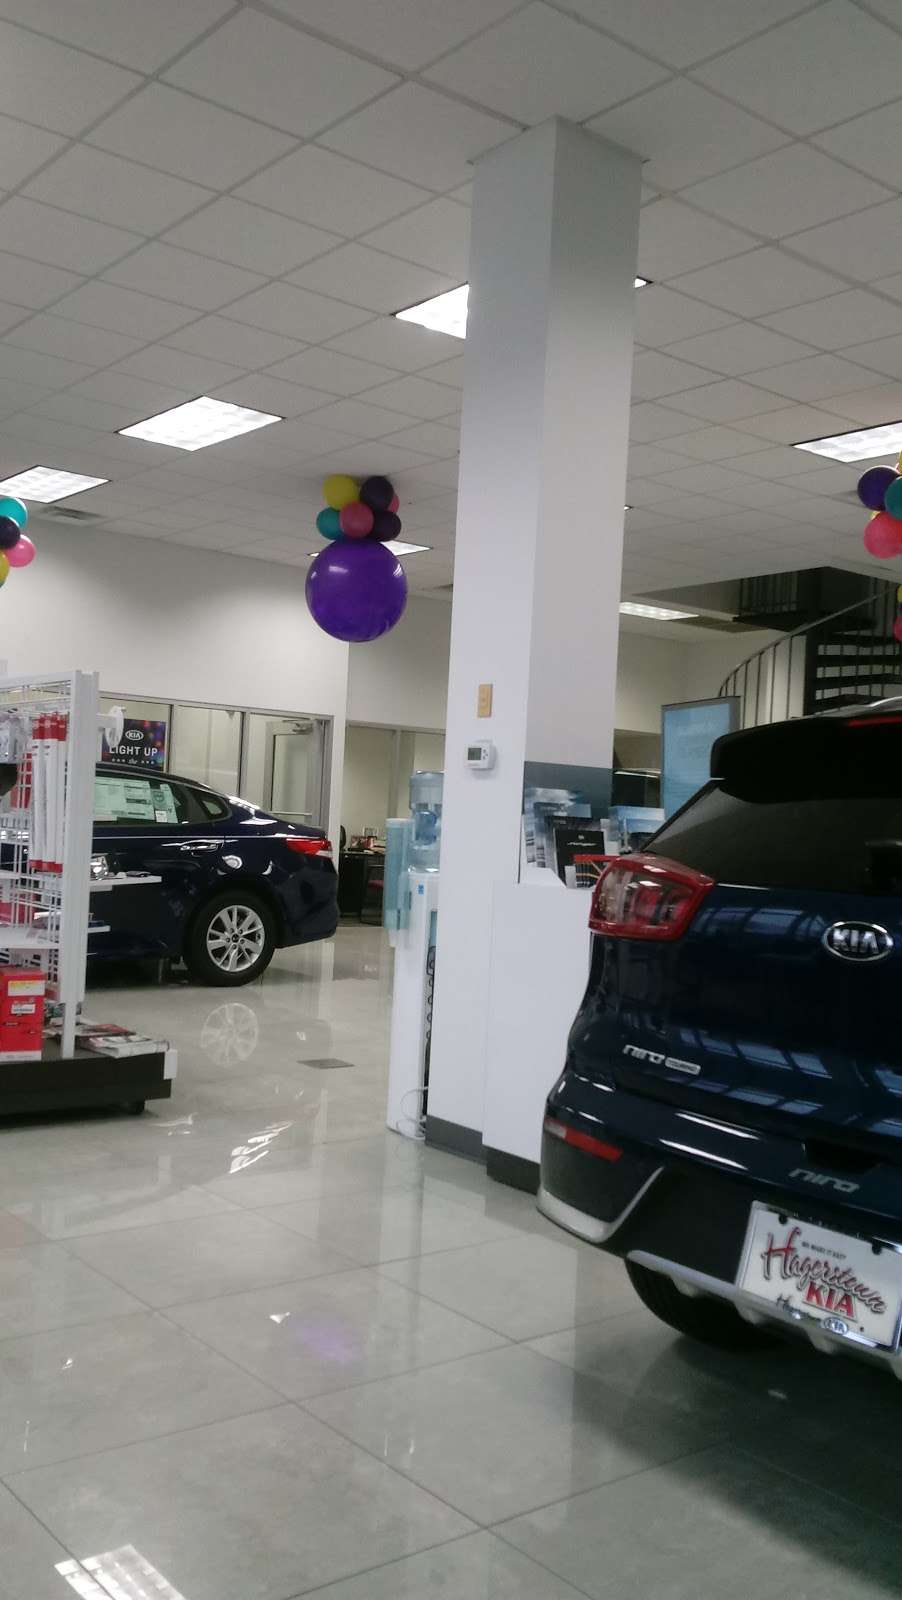 Hagerstown Kia | 10307 Auto Pl, Hagerstown, MD 21740 | Phone: (301) 739-7283